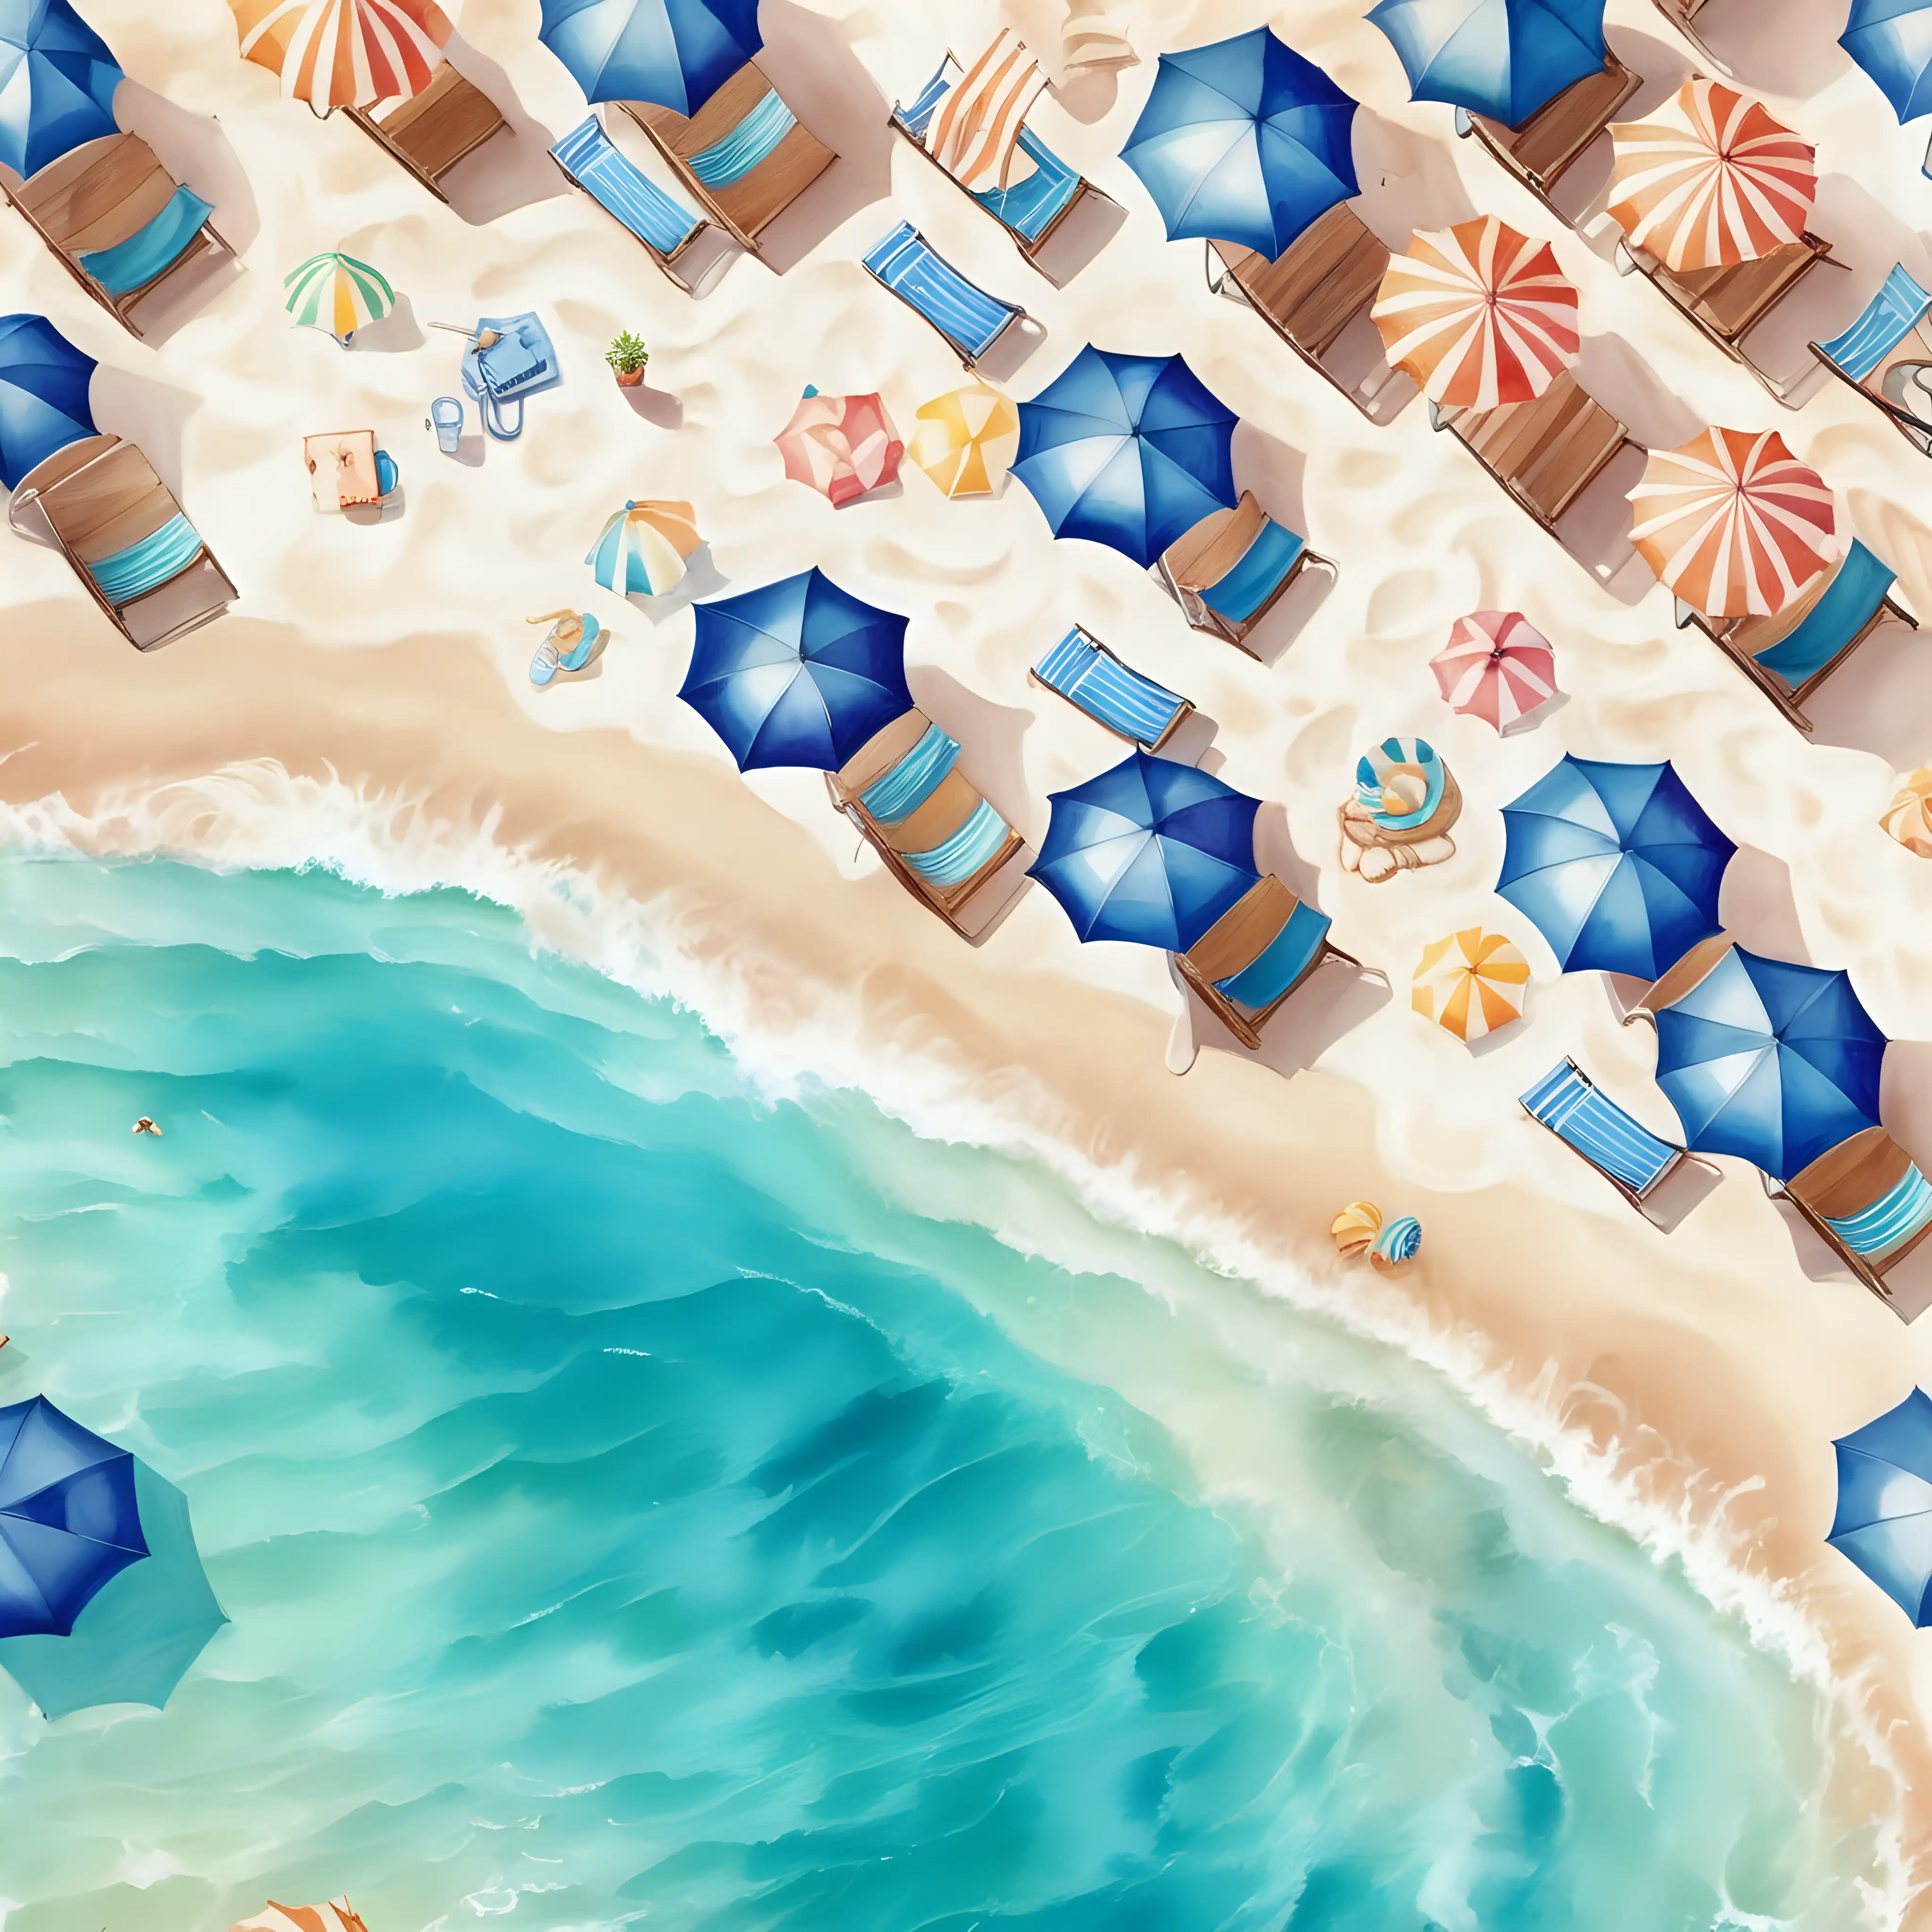 I want to create an illustrated pattern of the sea with beach with umbrellas and sunbeds, top view, I want an original illustration based on water colours or something similar